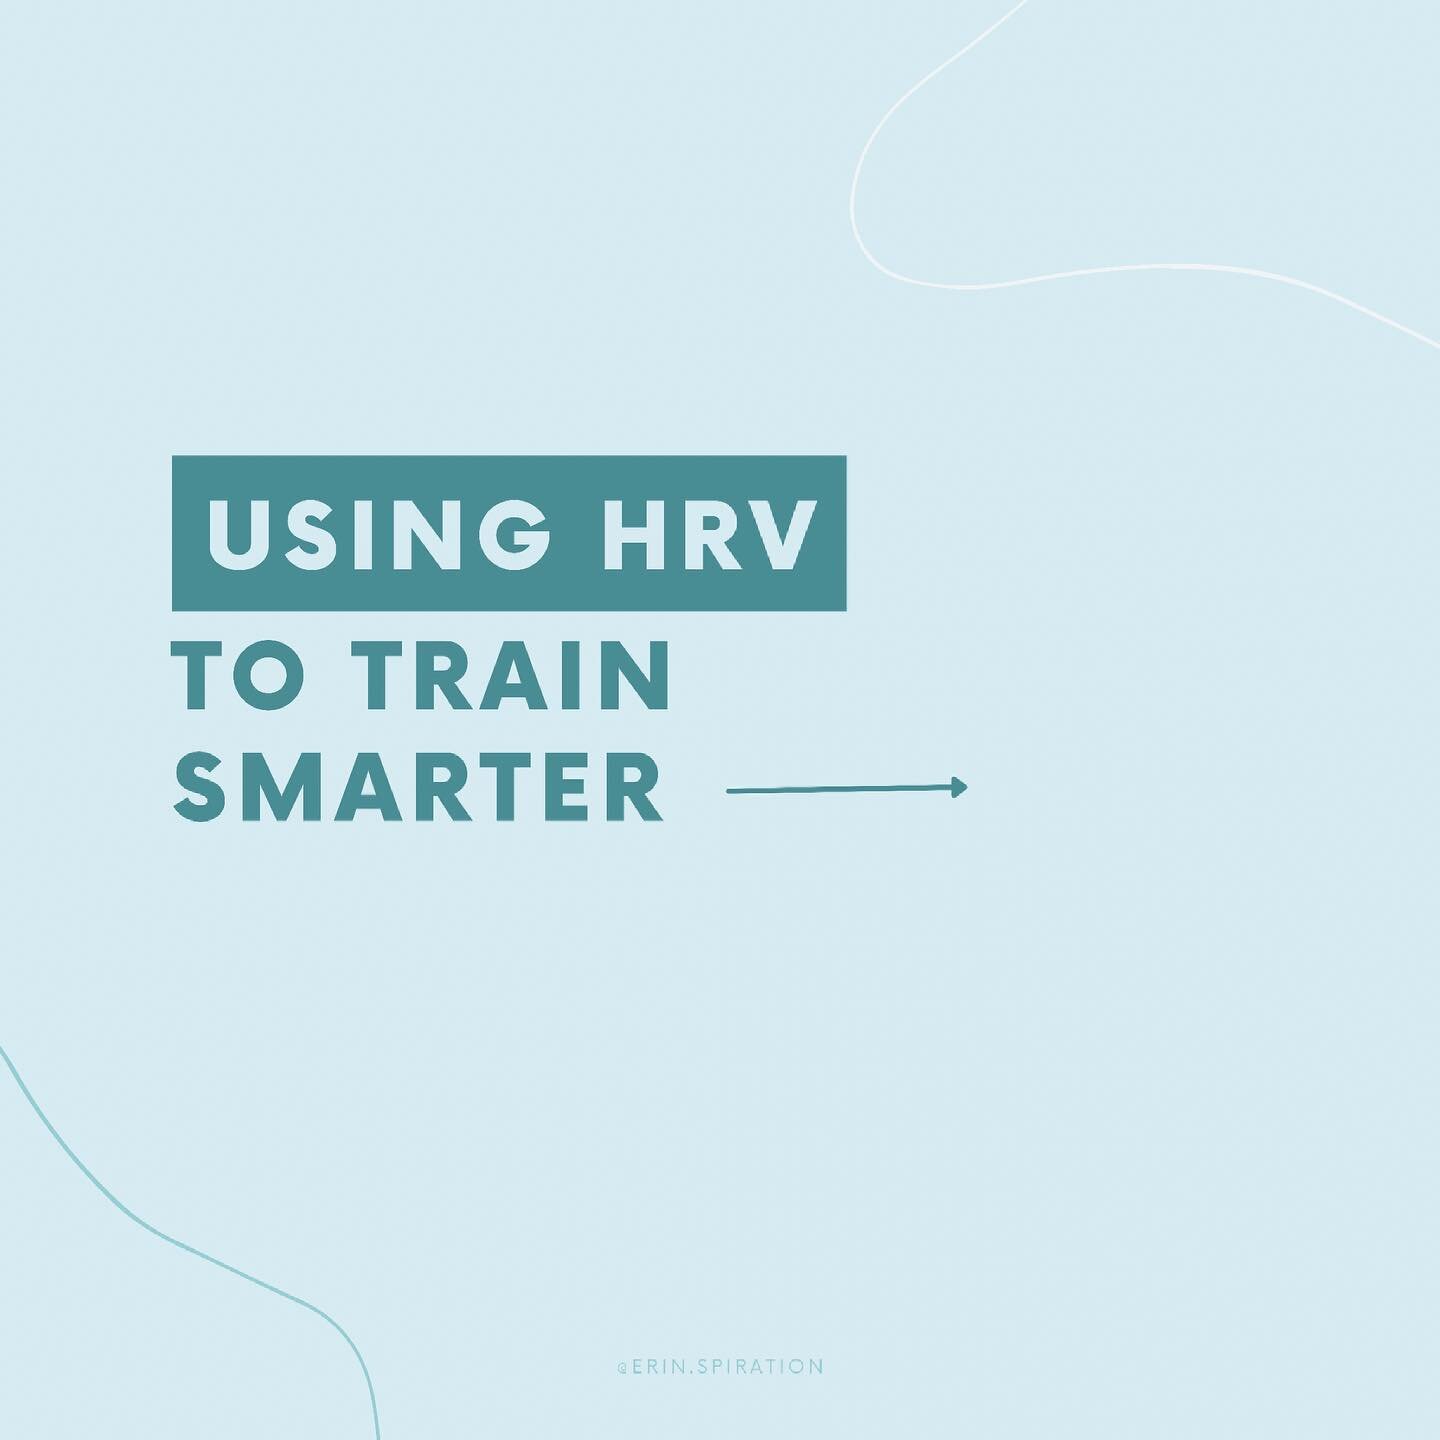 Fitness is more than reps❗️swipe for how I&rsquo;m using HRV to reach my goals and train smarter⚡️

When I first started my fitness / running journey years ago, I had the naive mentality that doing more would get me results faster and that doing less